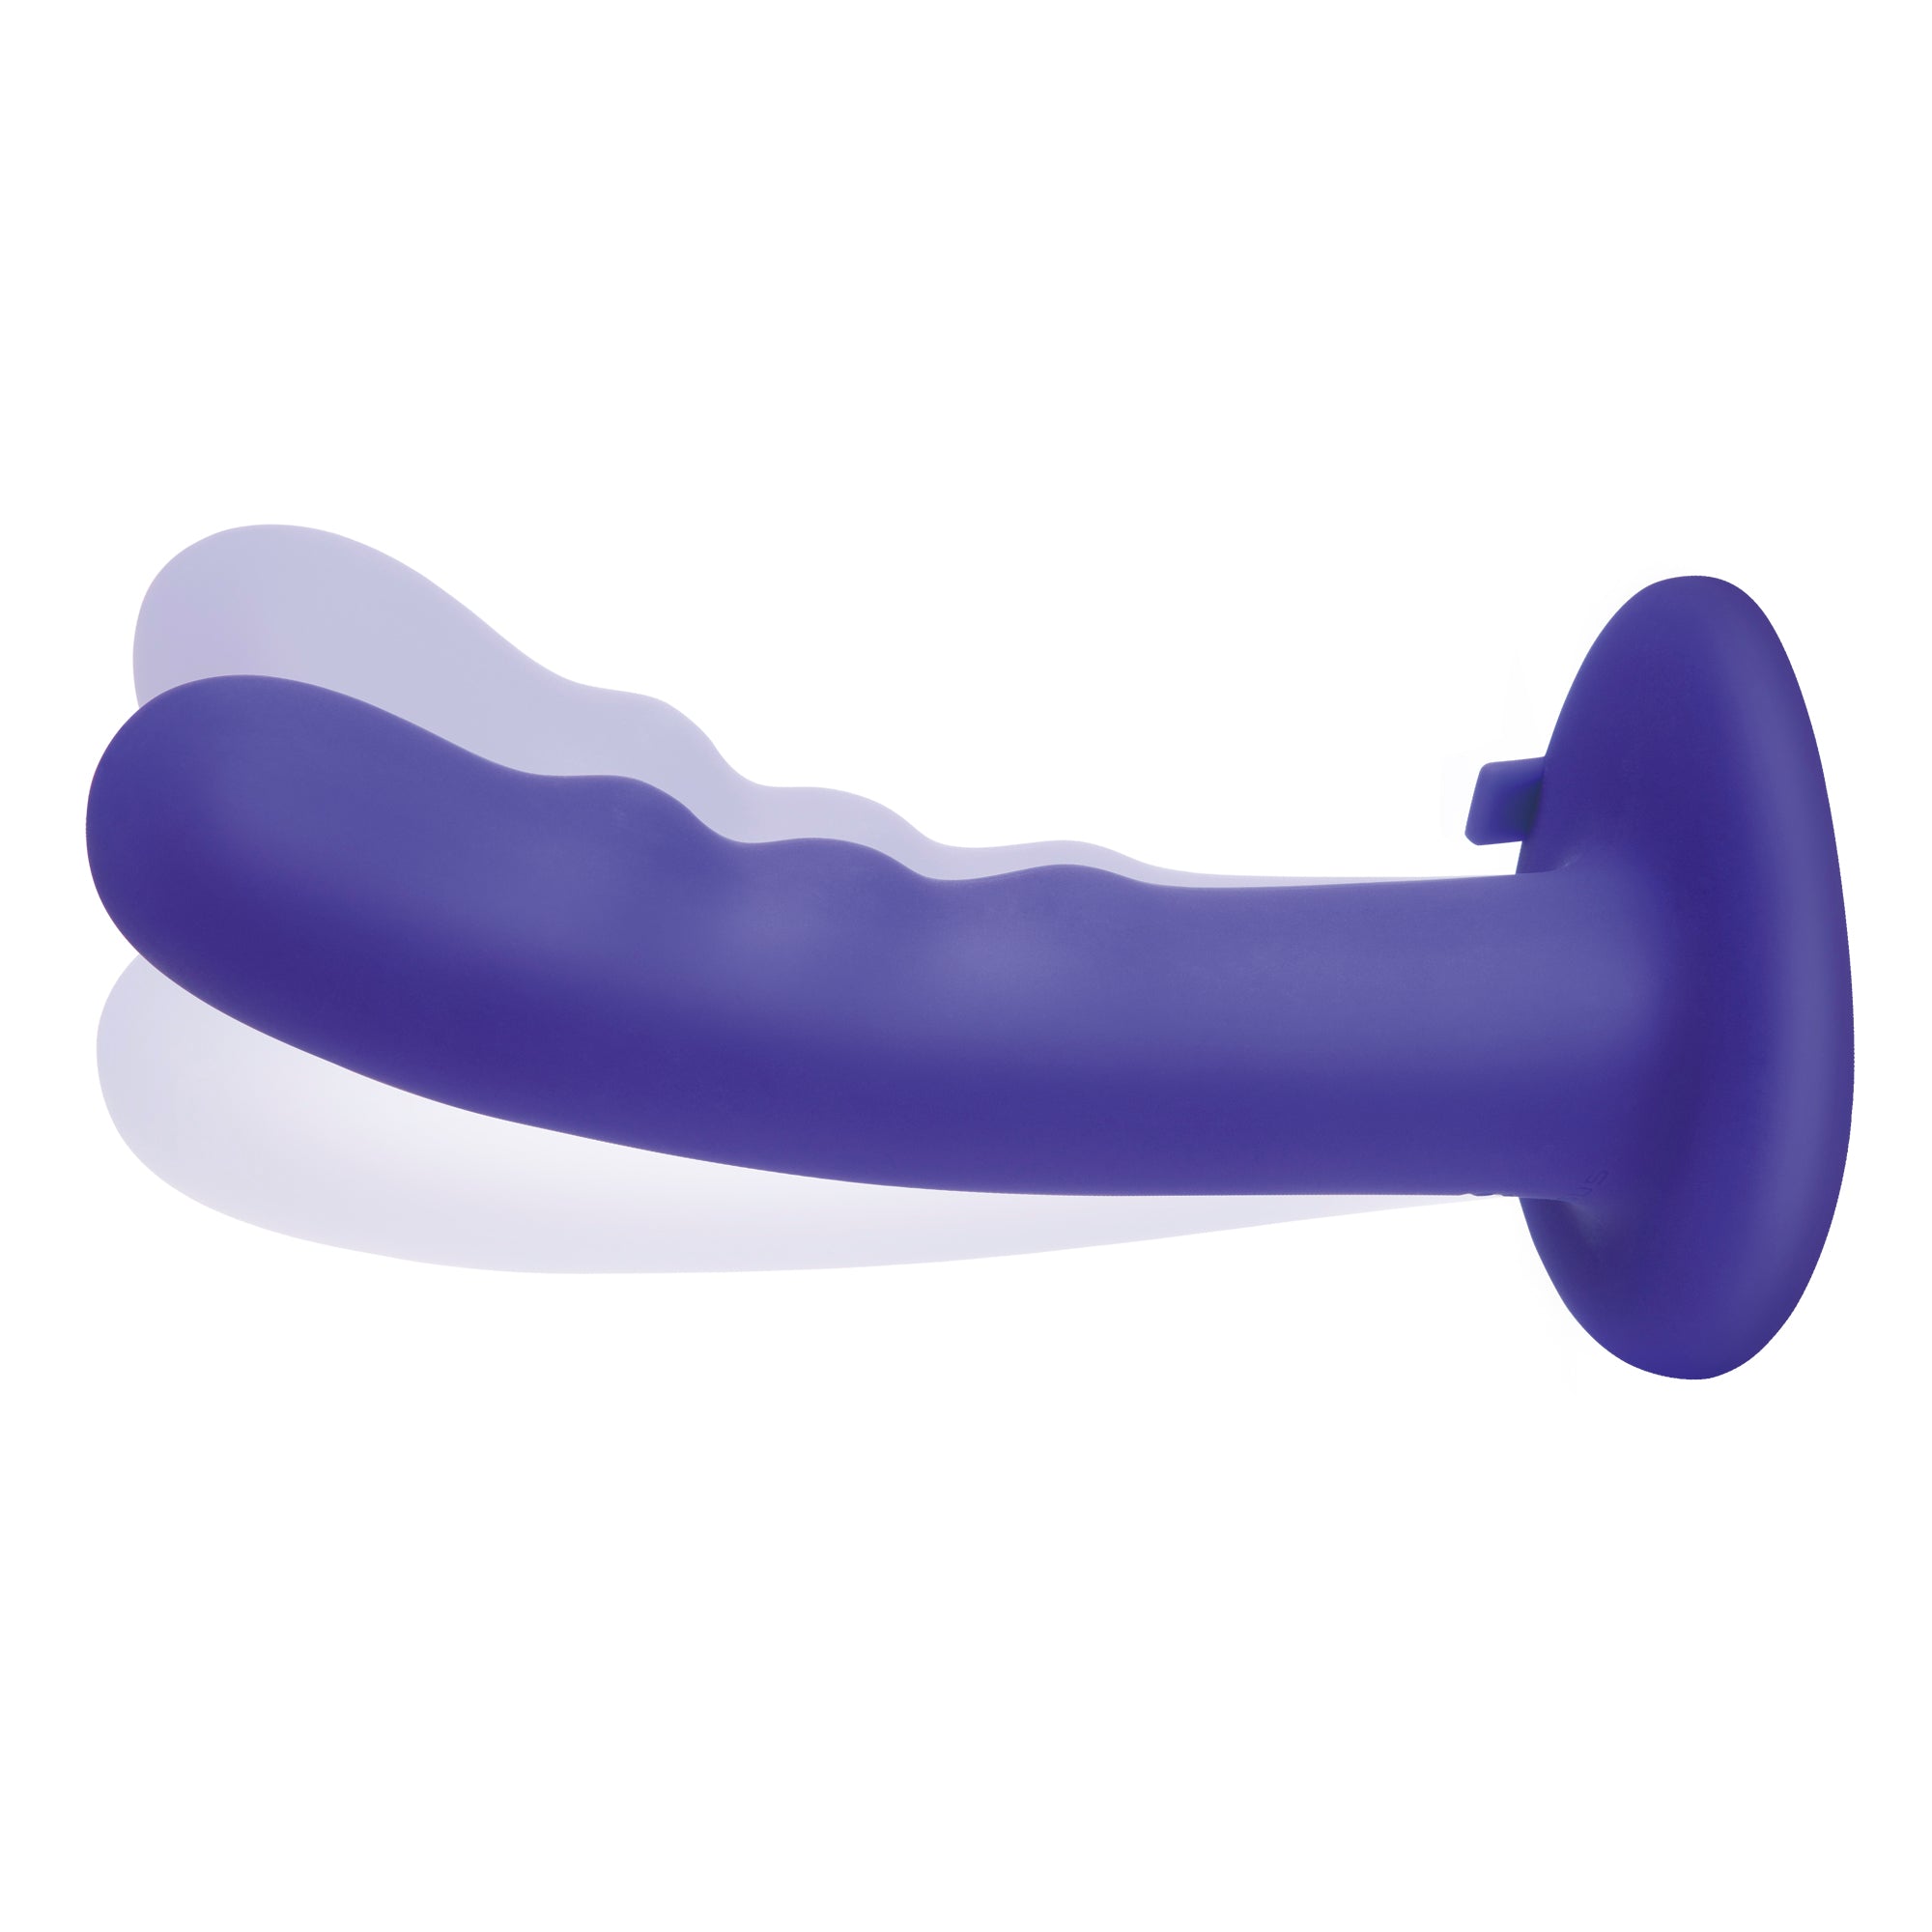 6" Curved Wave Silicone Peg with Harness included